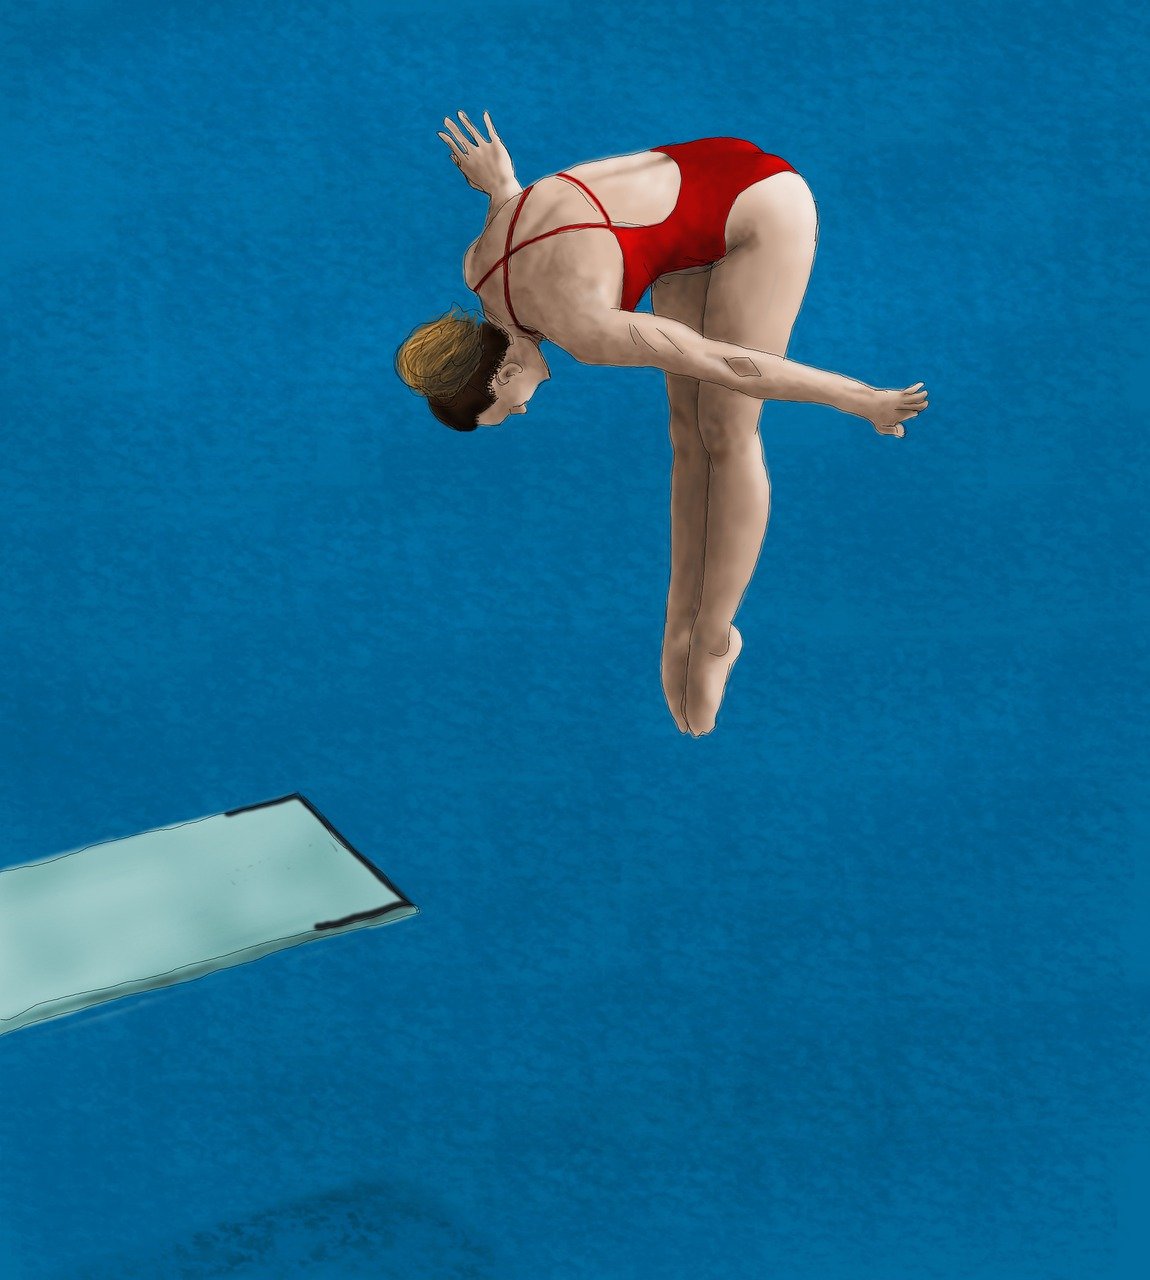 Image of a female diver mid dive.